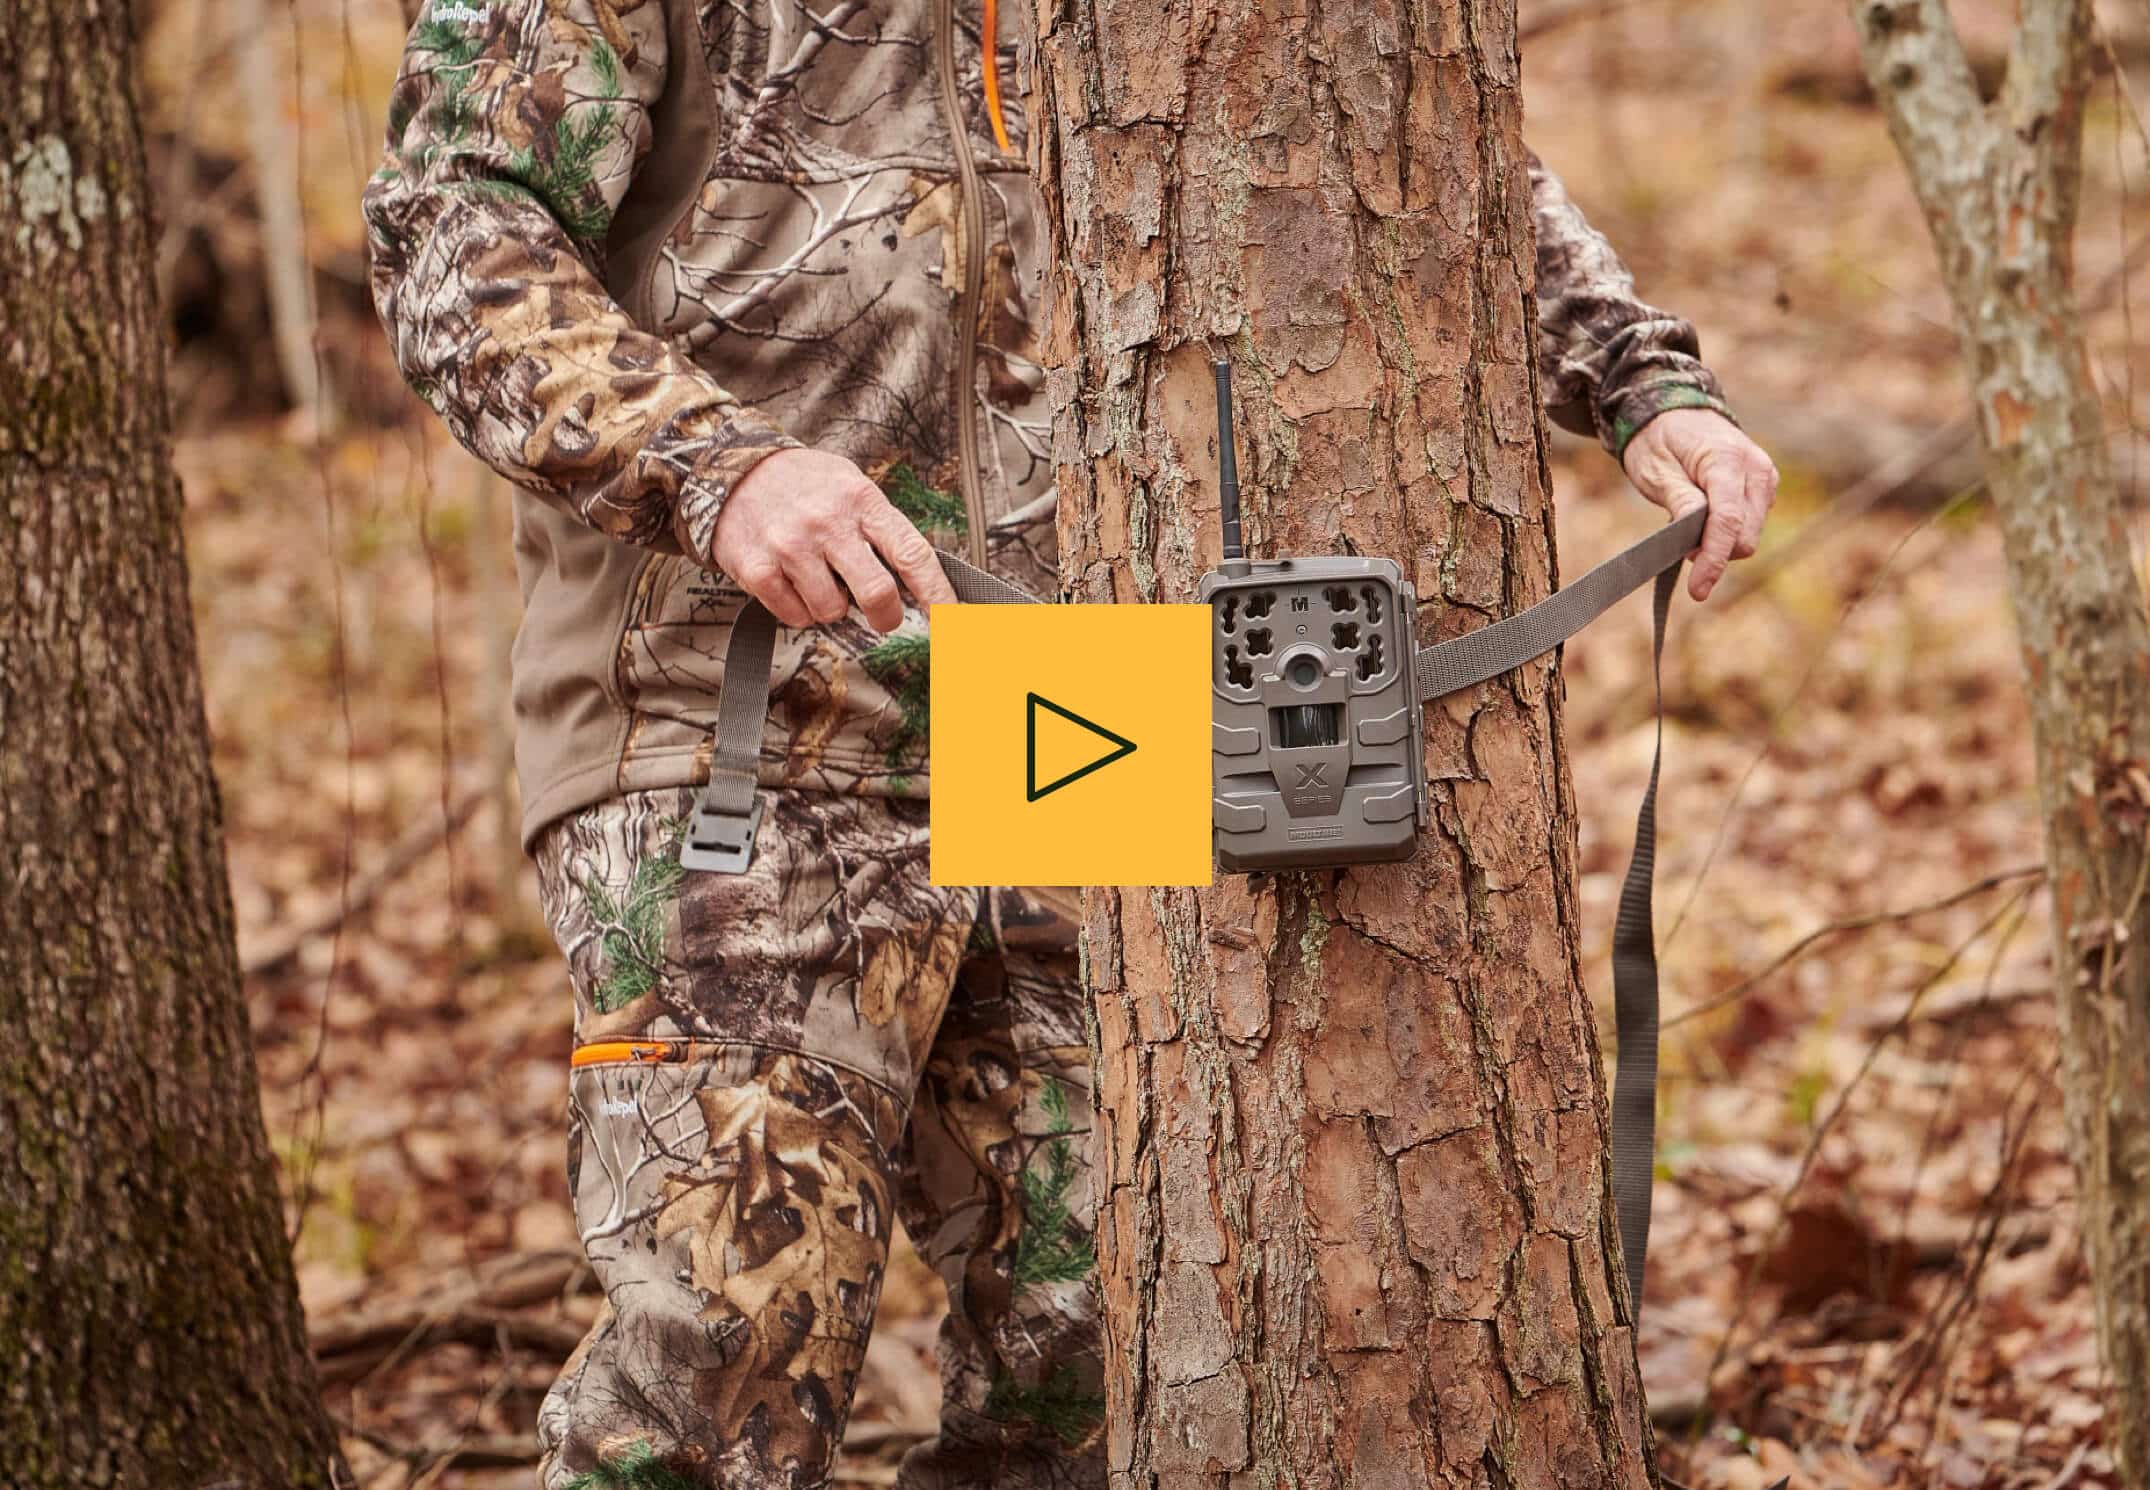 Man in camo tying a trail camera to a tree